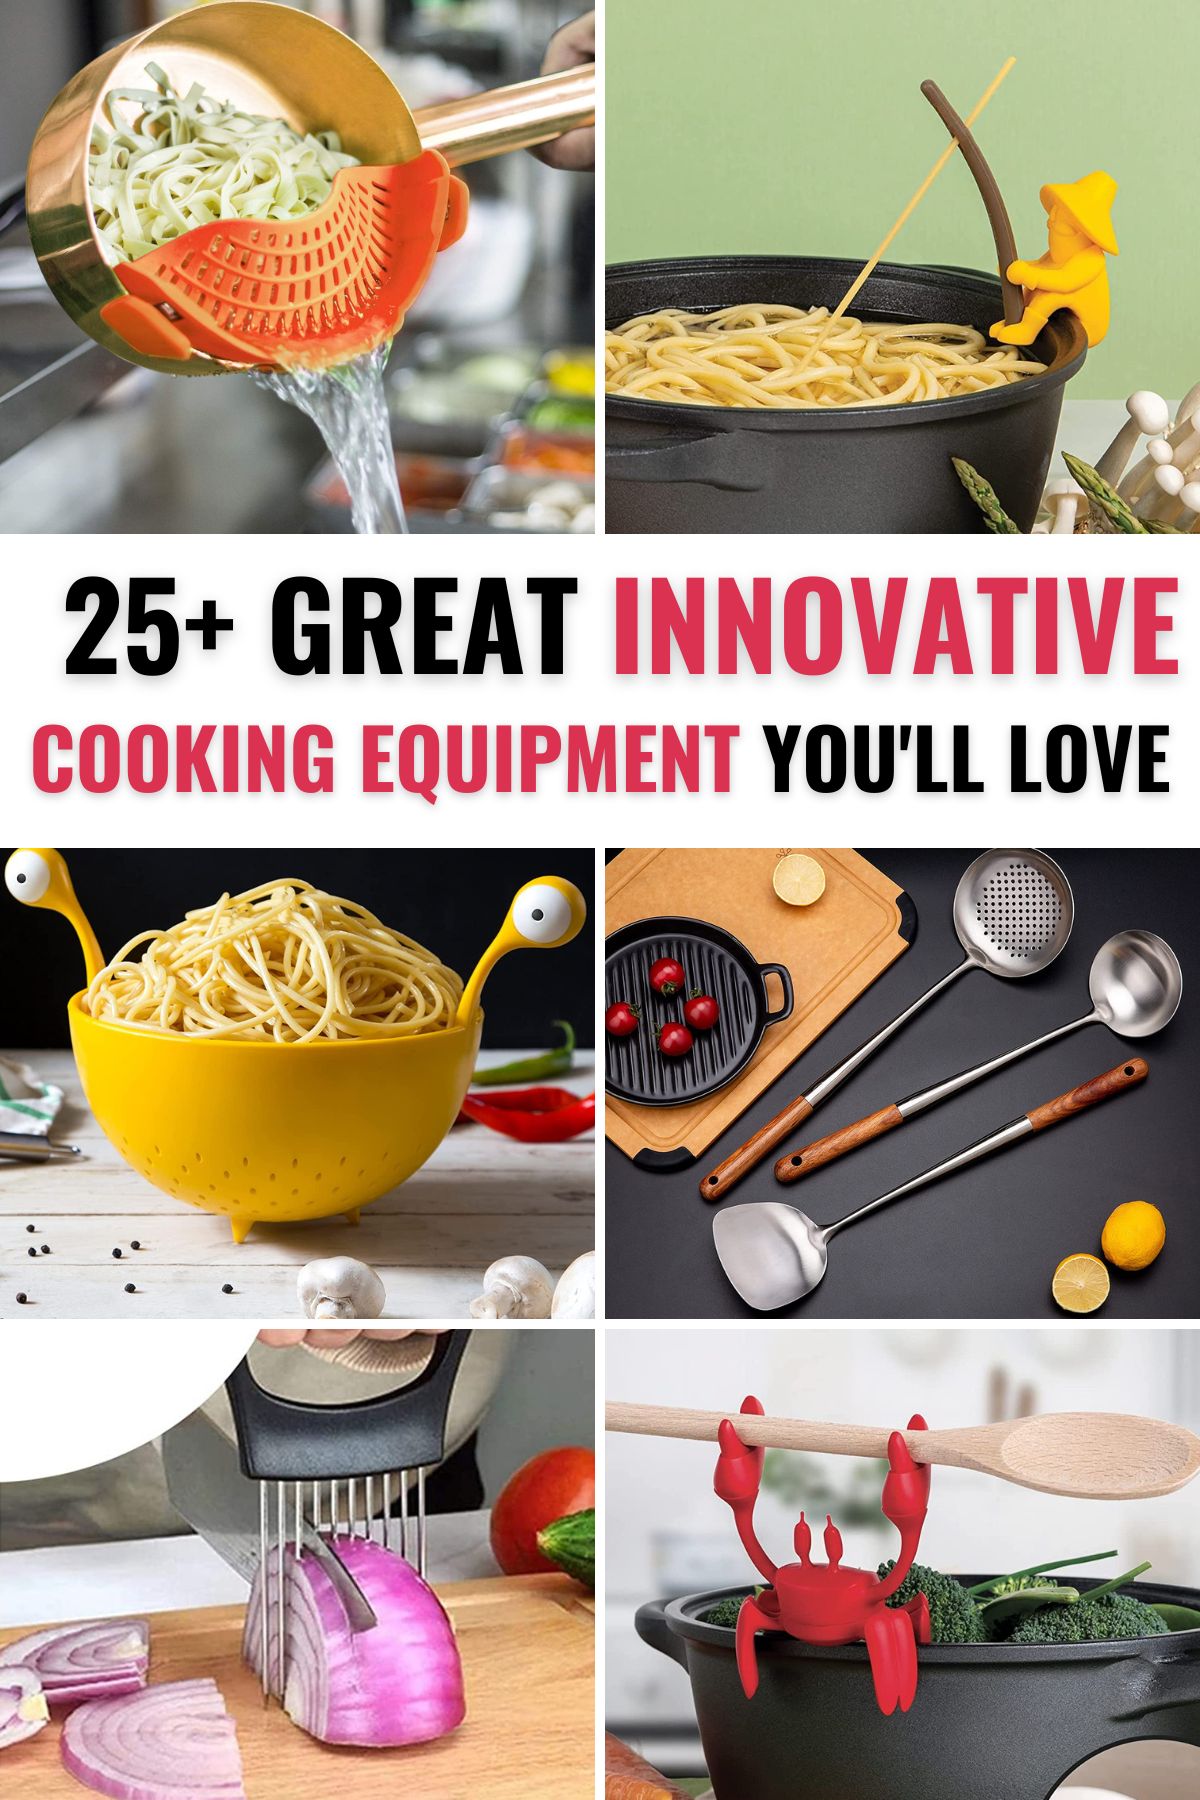 Innovative or Ineffective? 3 Unique Kitchen Tools by Request